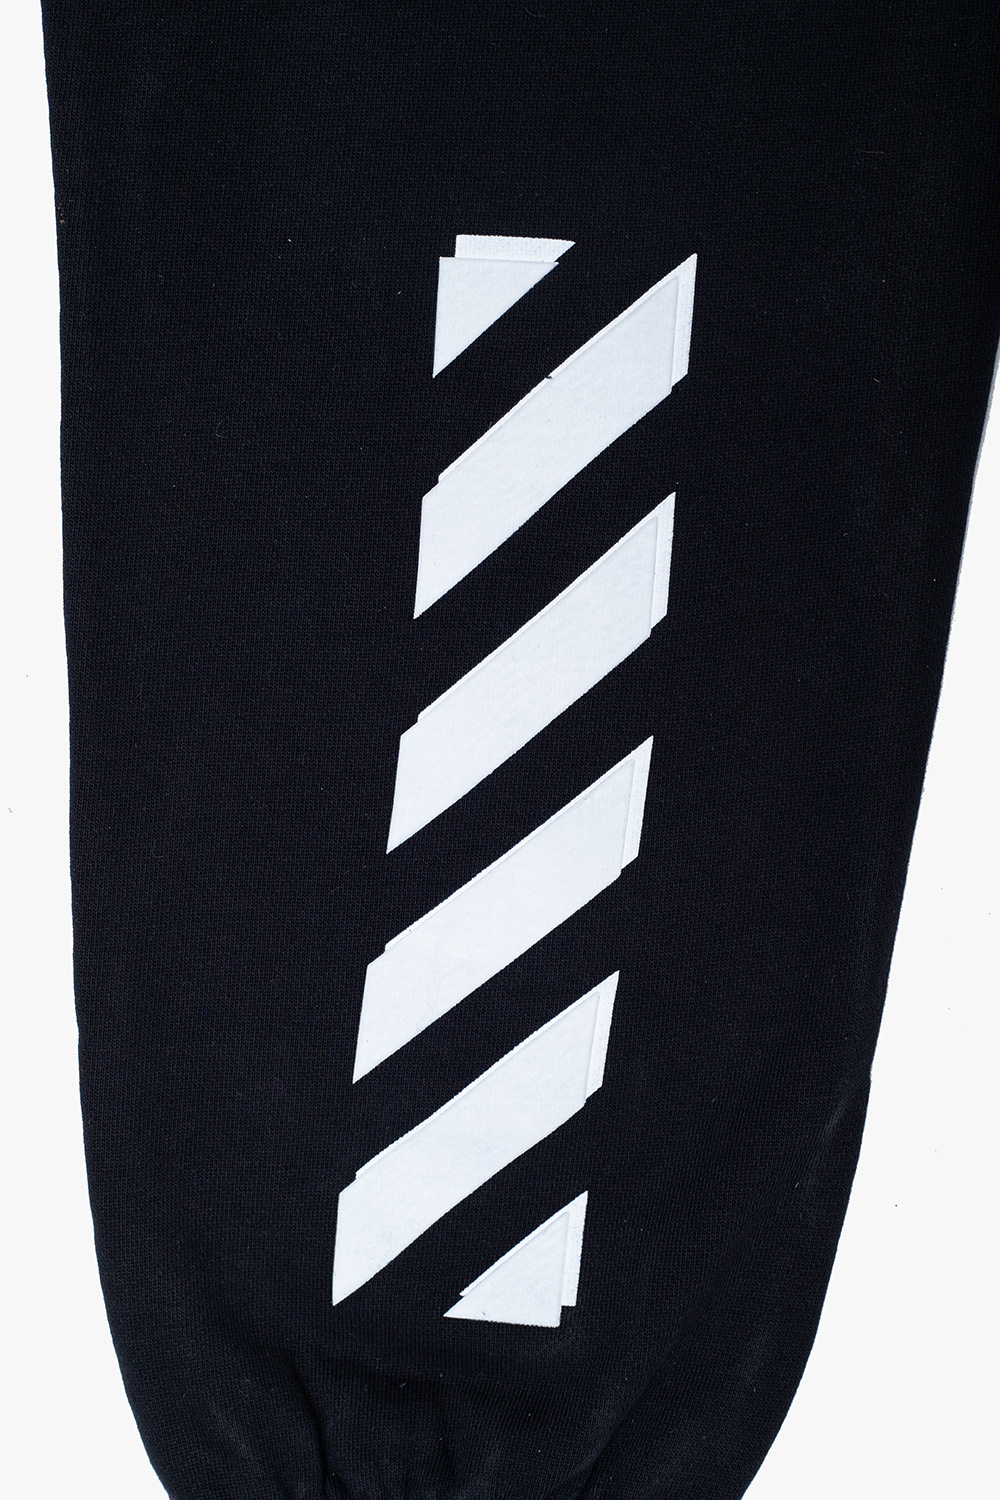 Off-White Kids ribbed trousers kenzo trousers